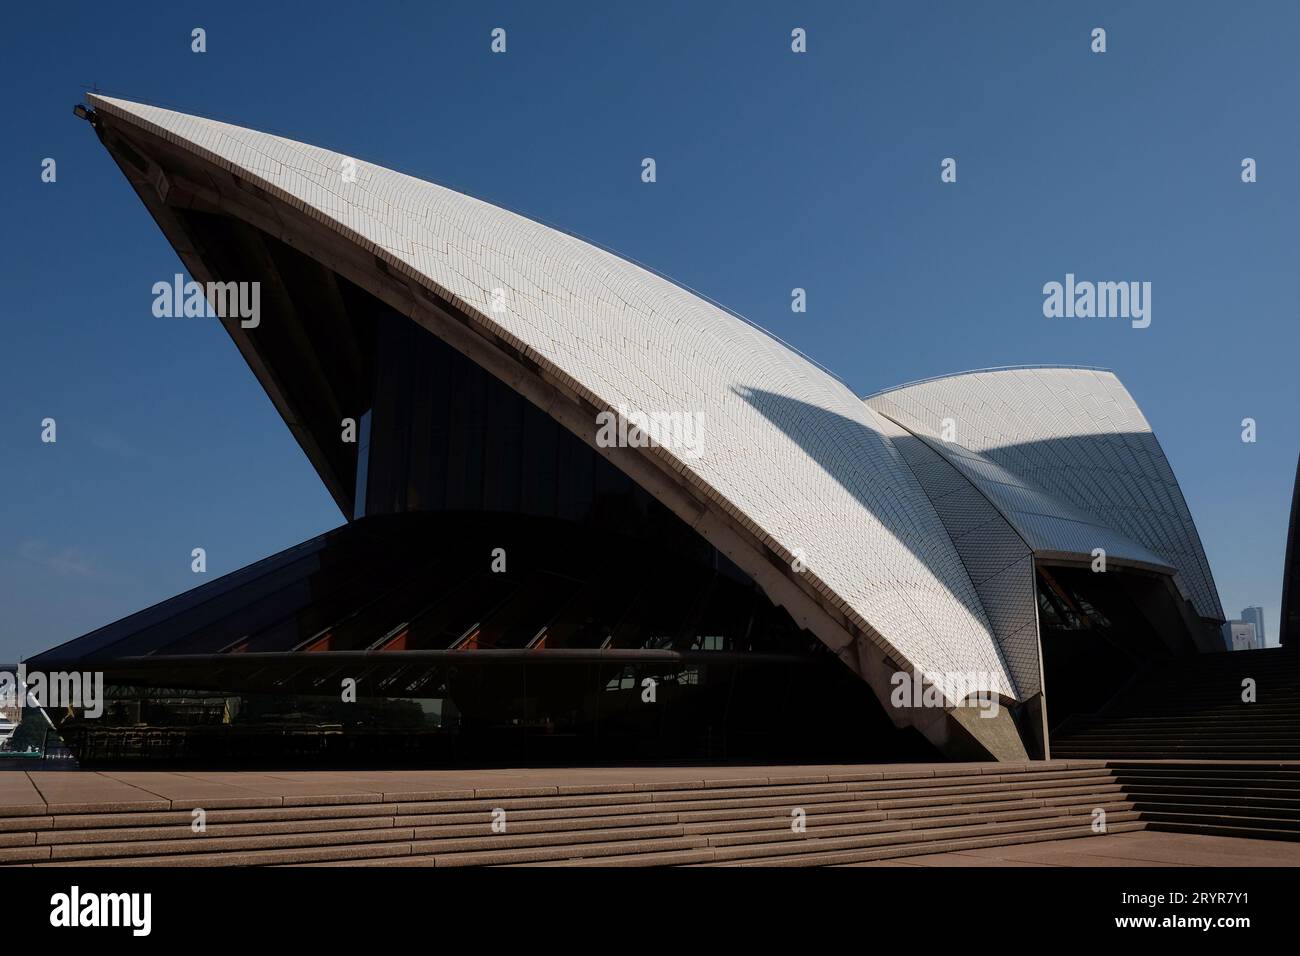 Restaurant pavilion glass walls and the white shells against a blue sky from the upper podium of the Sydney Opera House, New South Wales, Australia Stock Photo